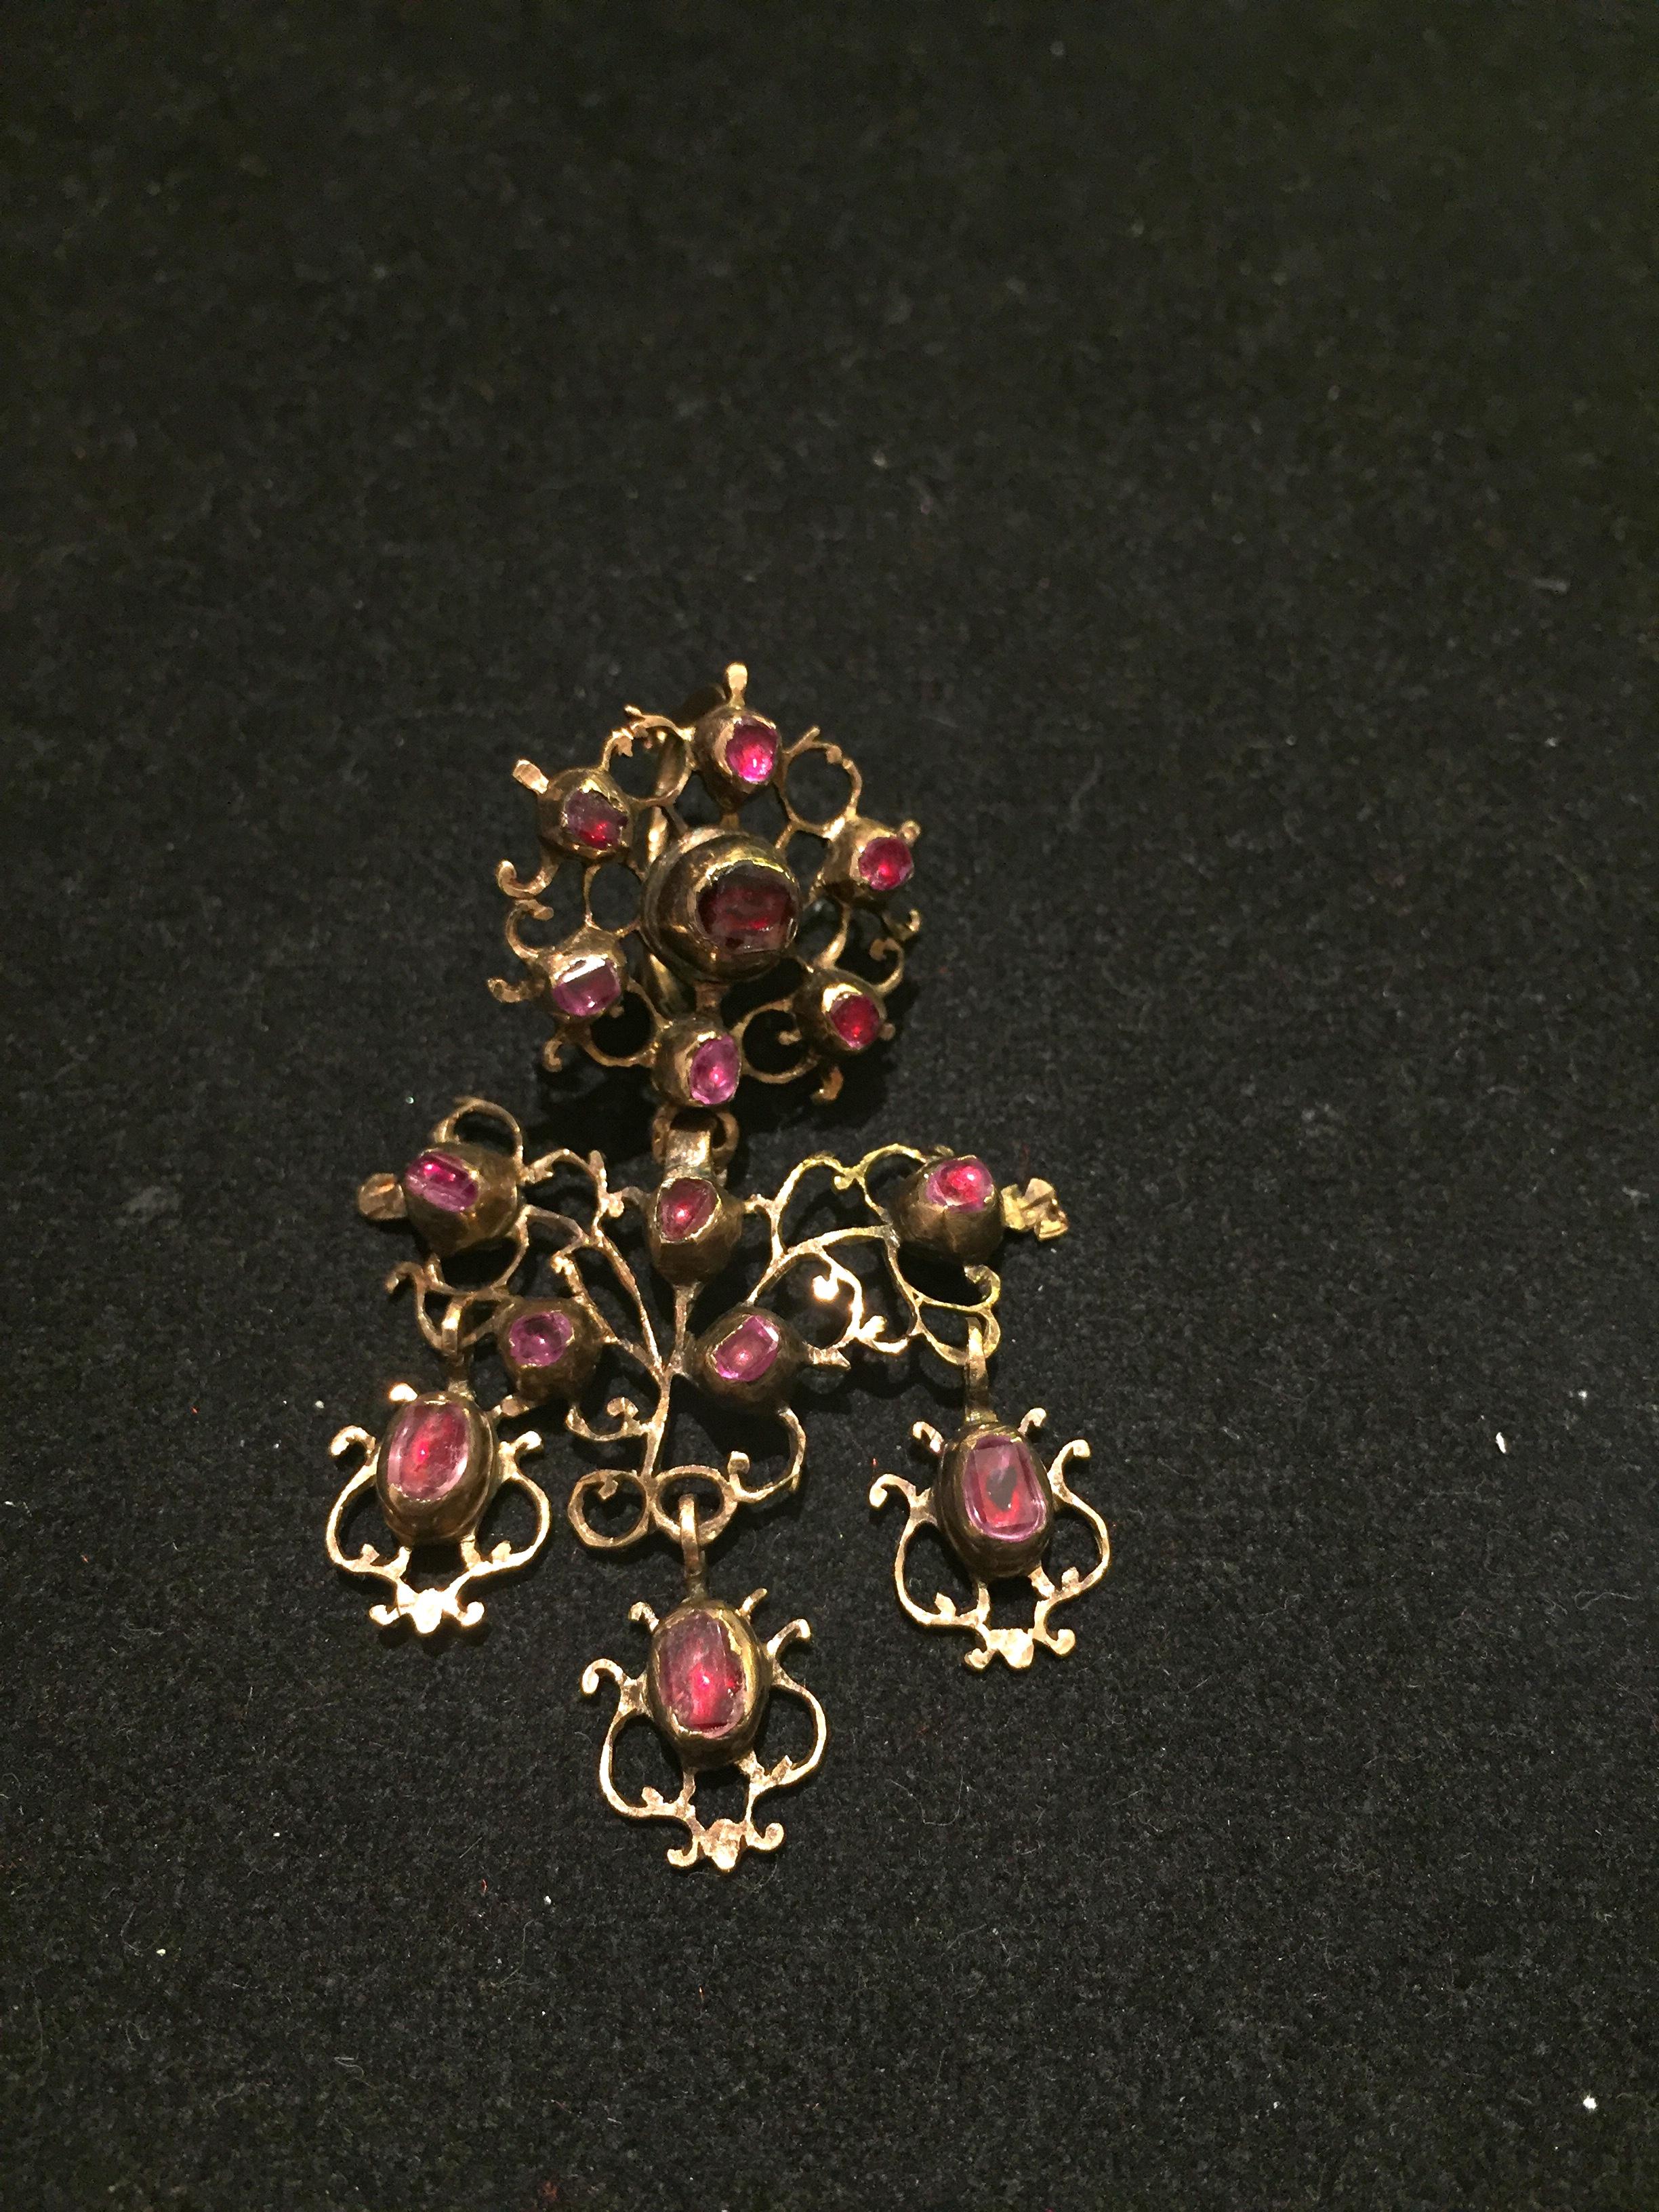 Ruby Chandelier Earrings 18kt Gold ,made in Sicily marked Palermo second half of 18th century.
